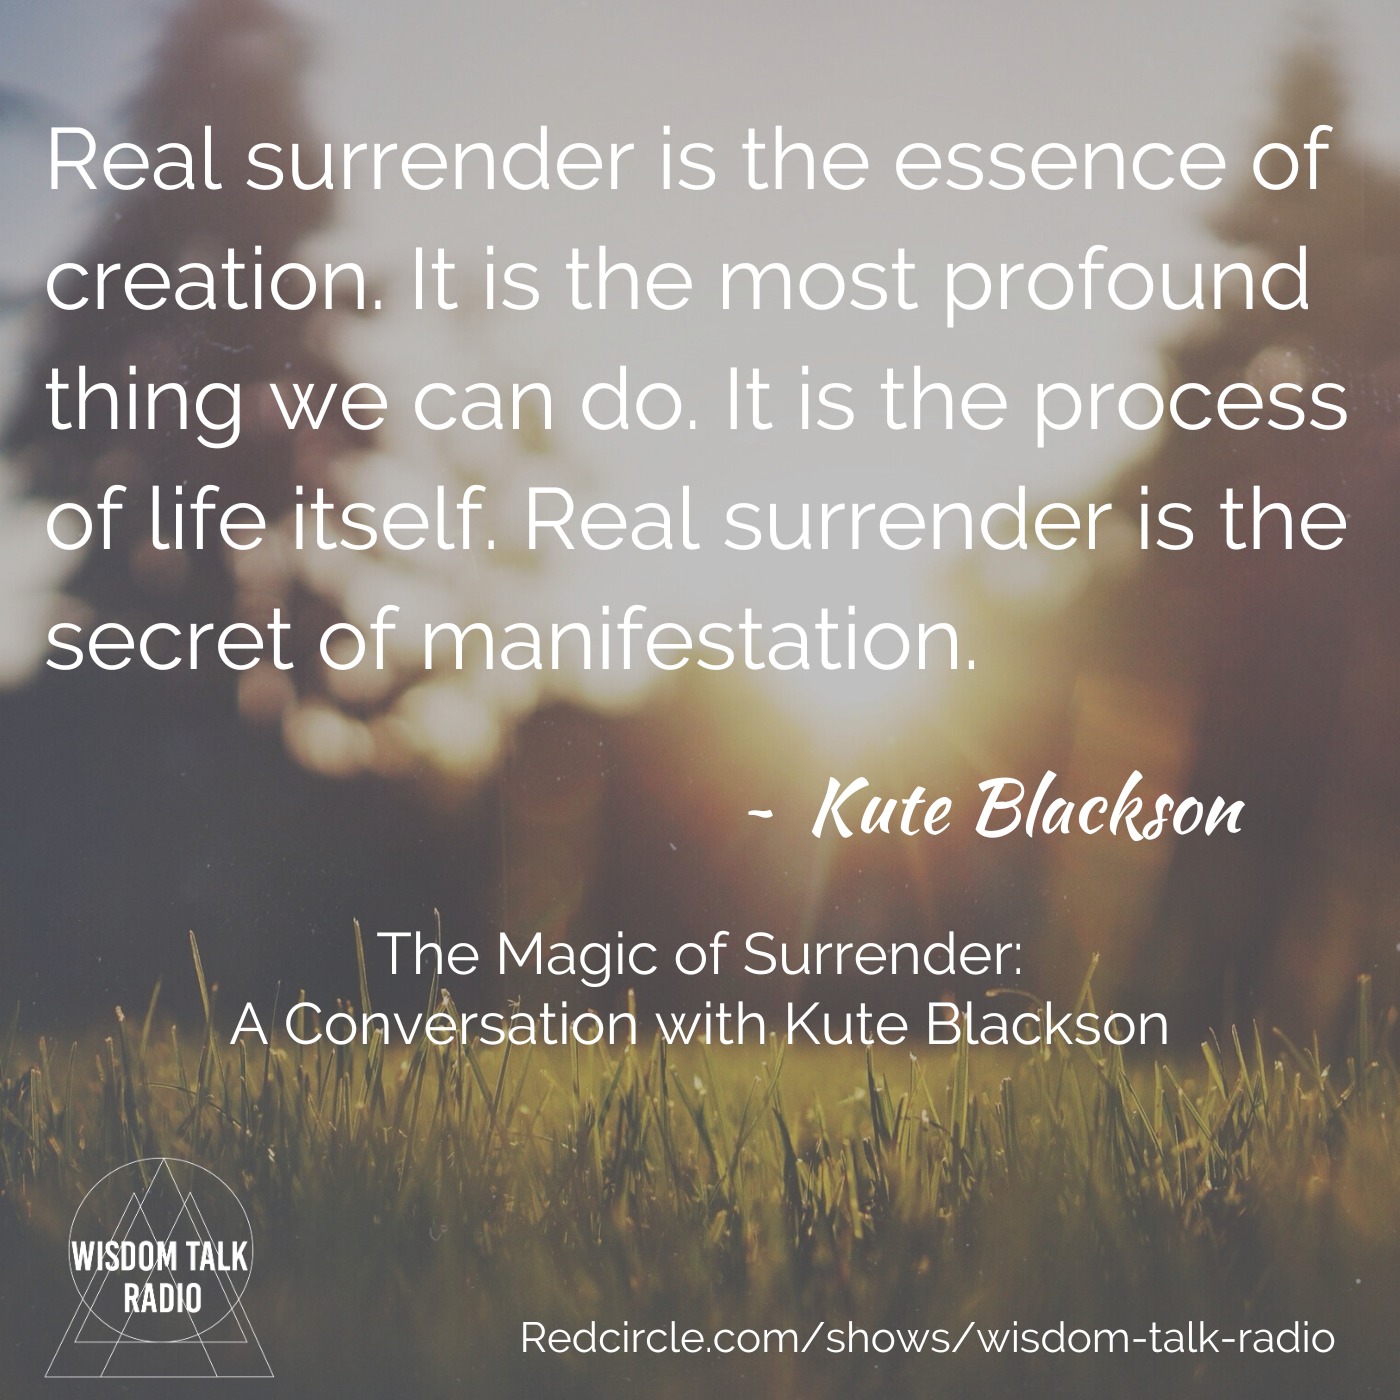 The Magic of Surrender: a Conversation with Kute Blackson